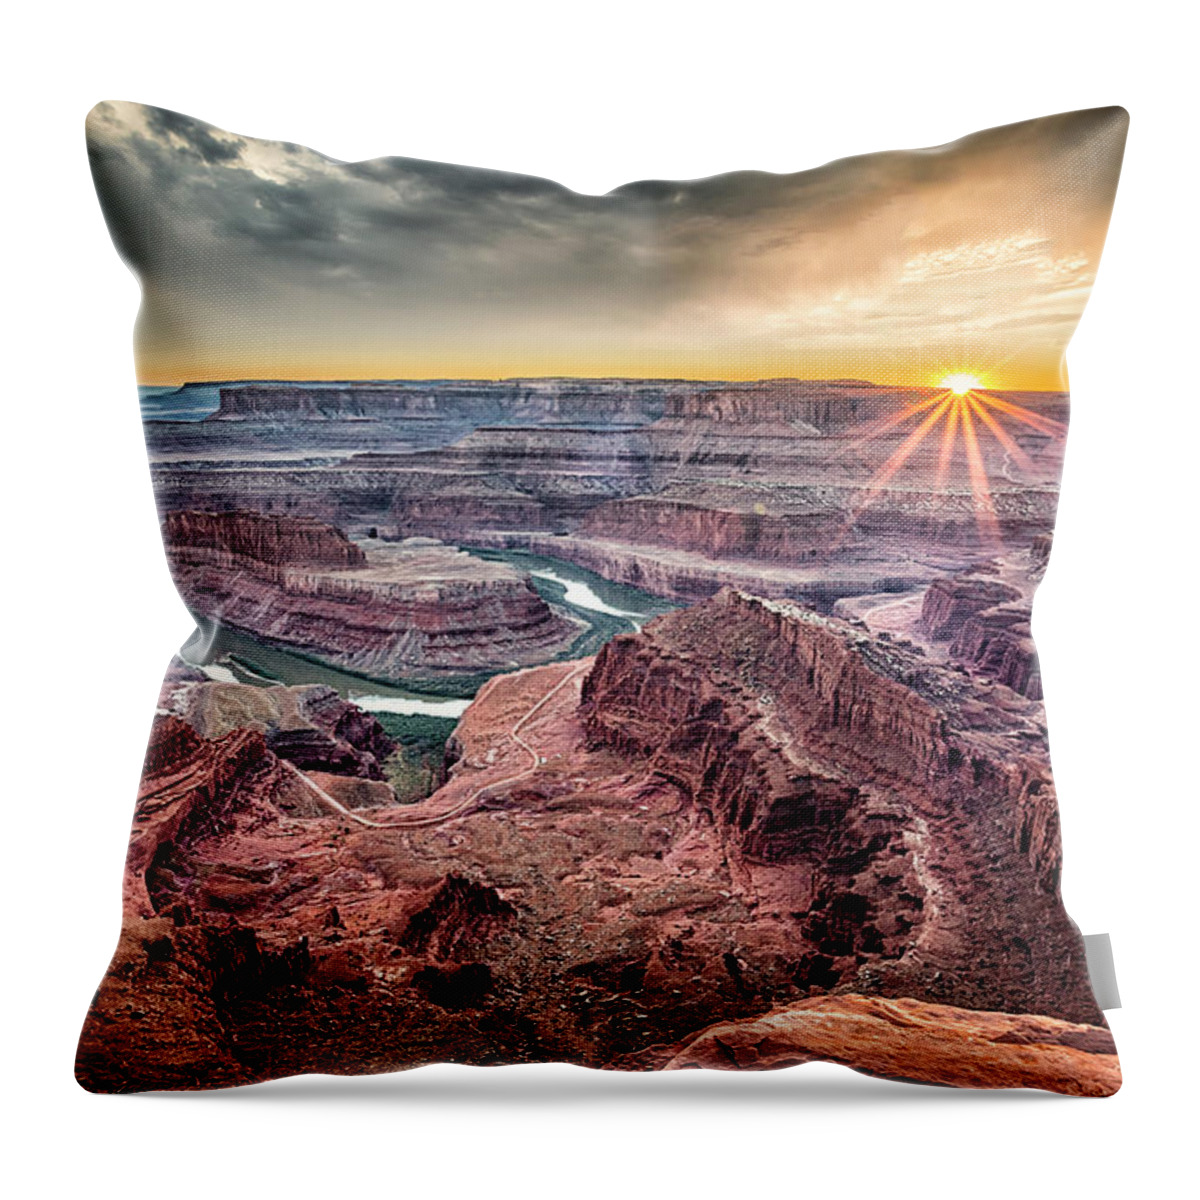 2020 Utah Trip Throw Pillow featuring the photograph Dead Horse Point Sunset by Gary Johnson